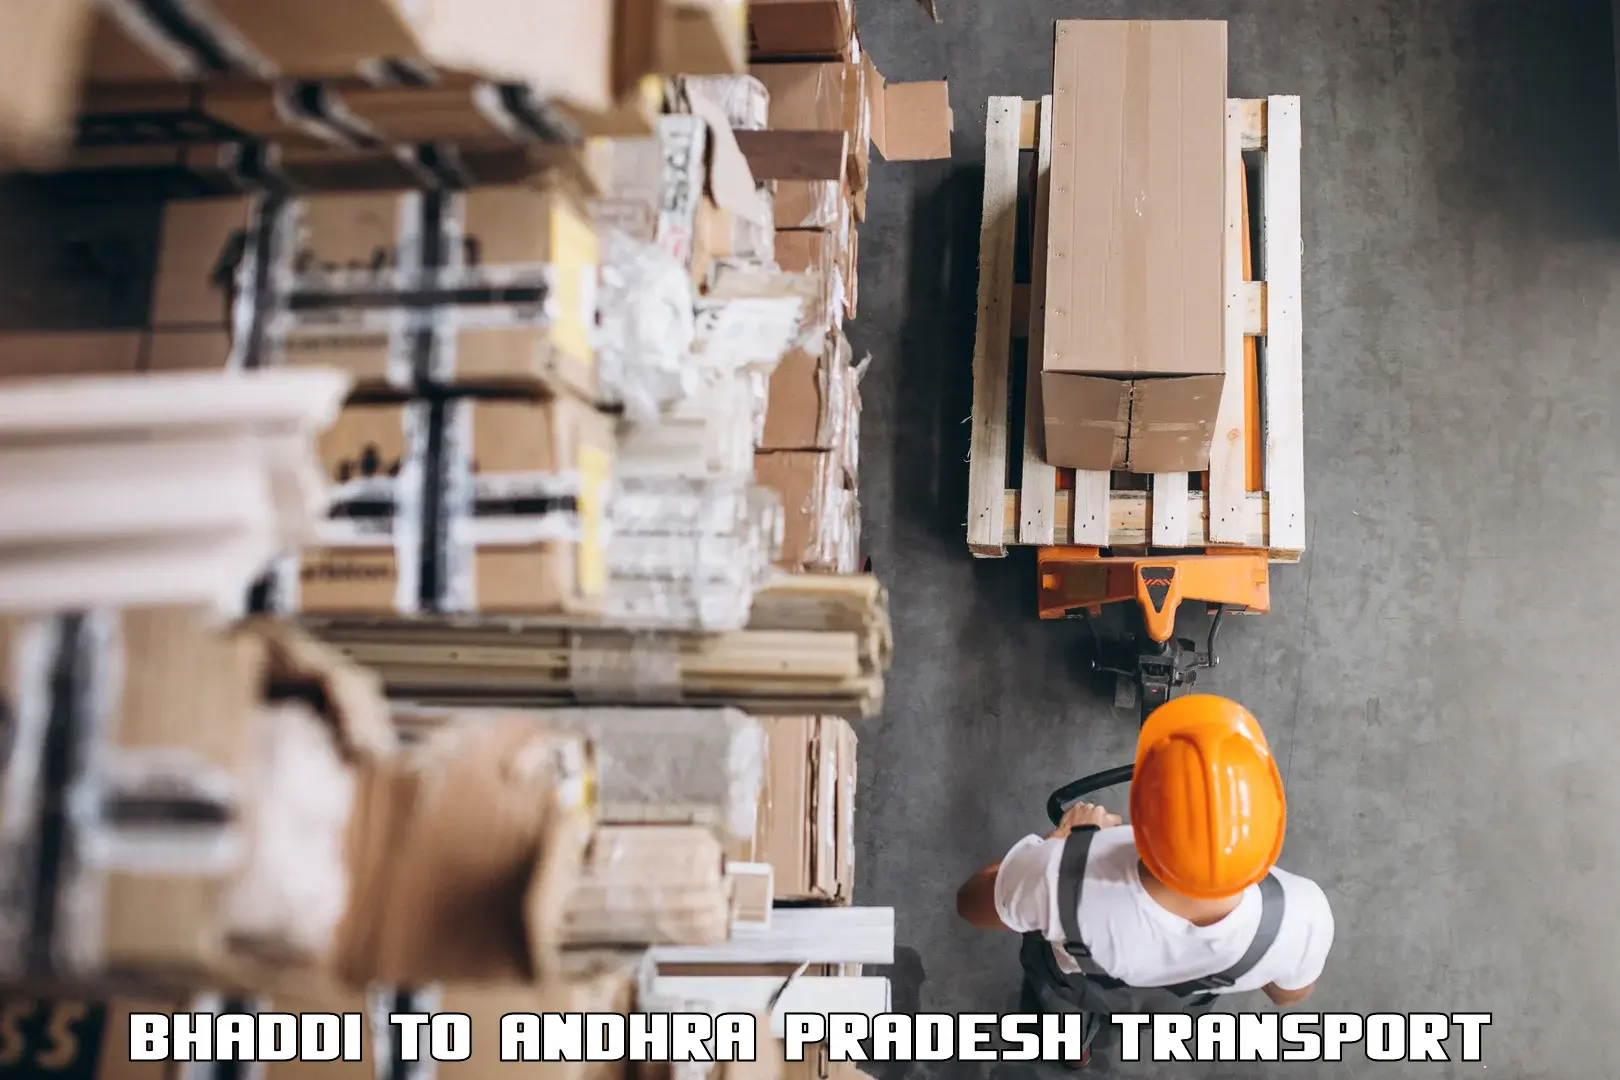 Part load transport service in India Bhaddi to Mudigubba